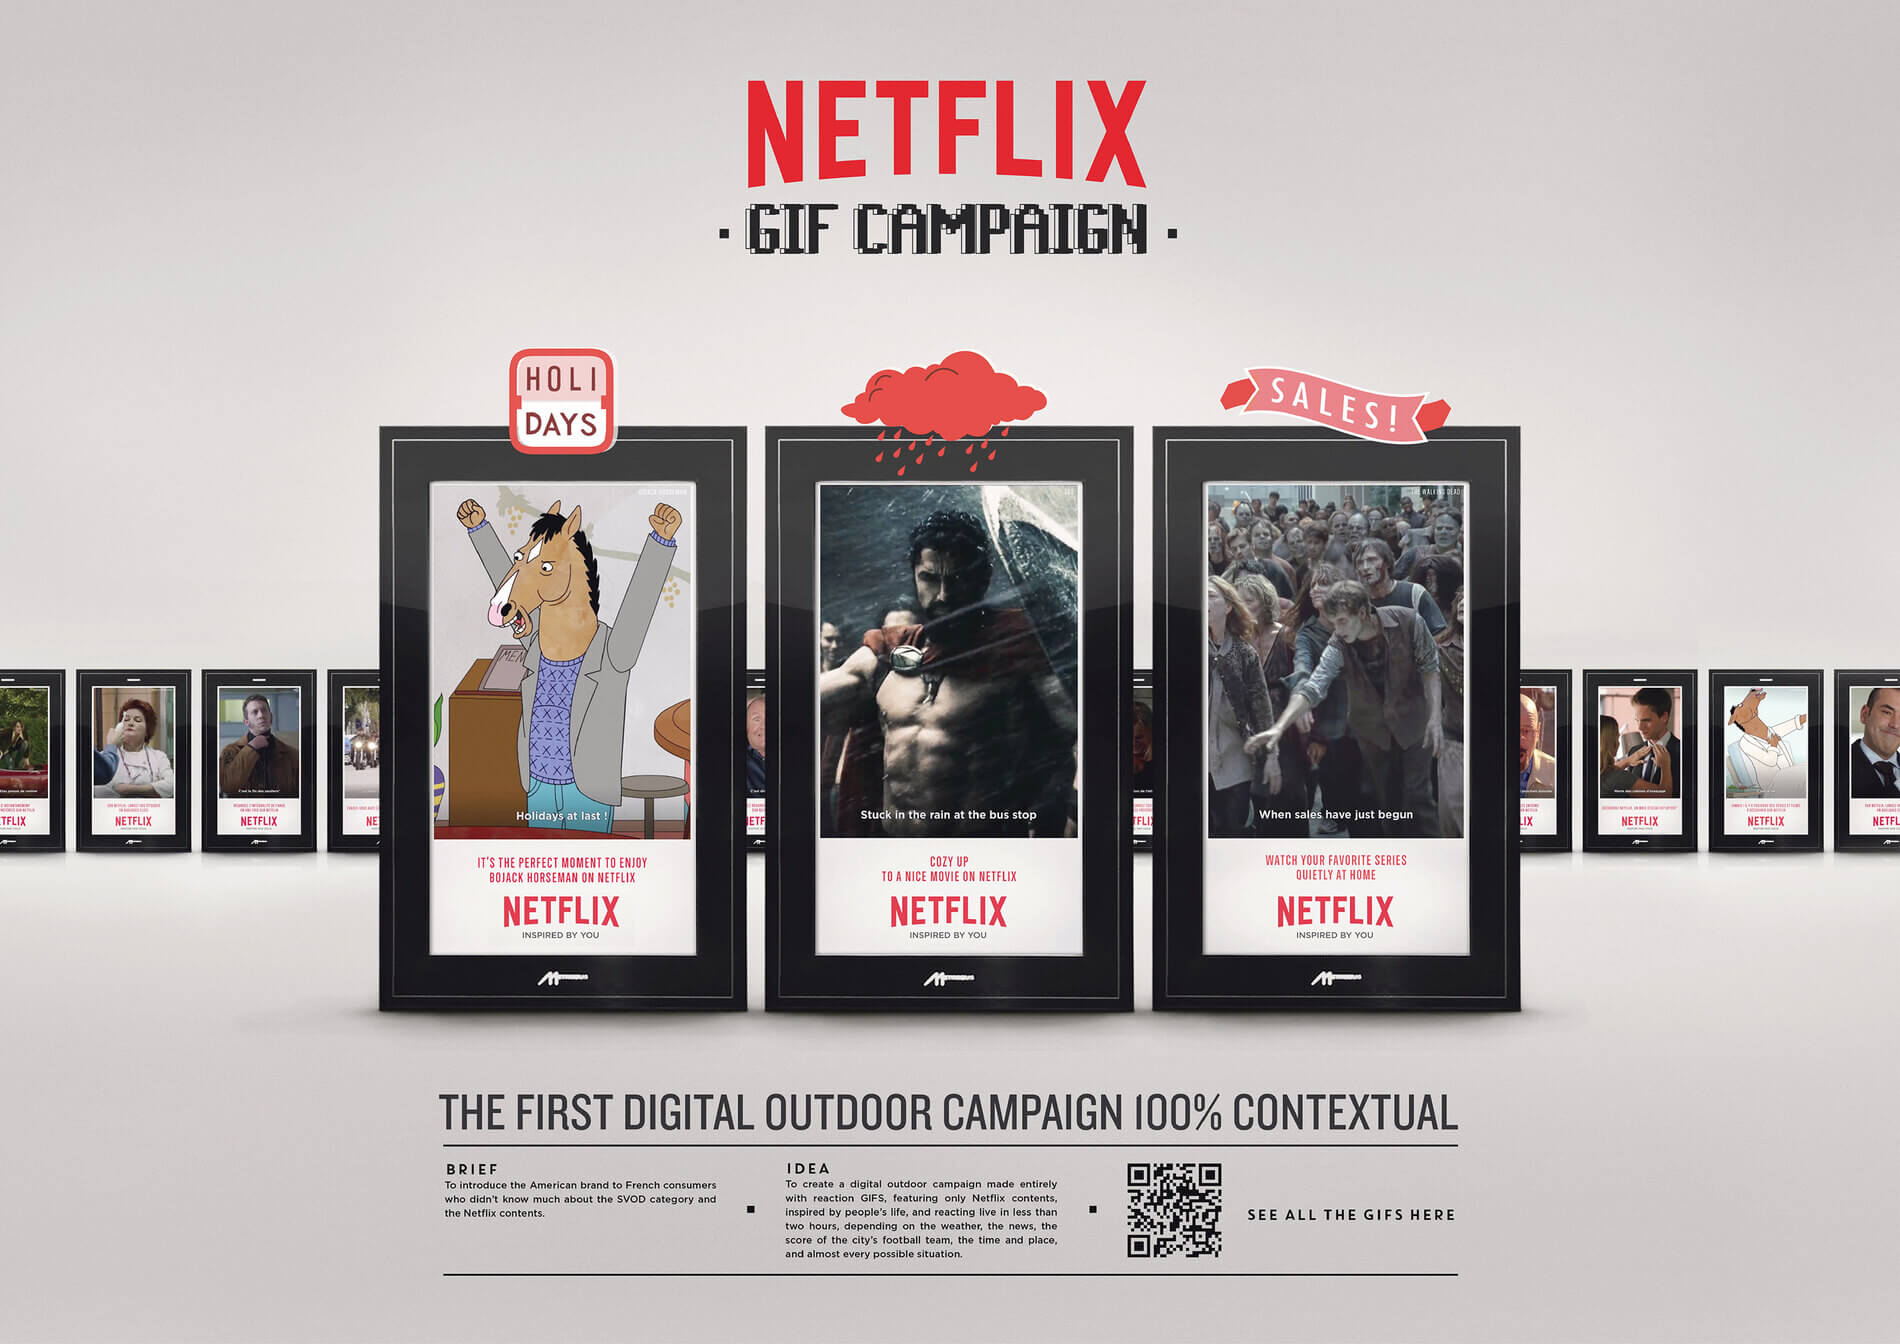 Netflix Gif Campaign Netflix Gif Campaign Campaigns of the World®